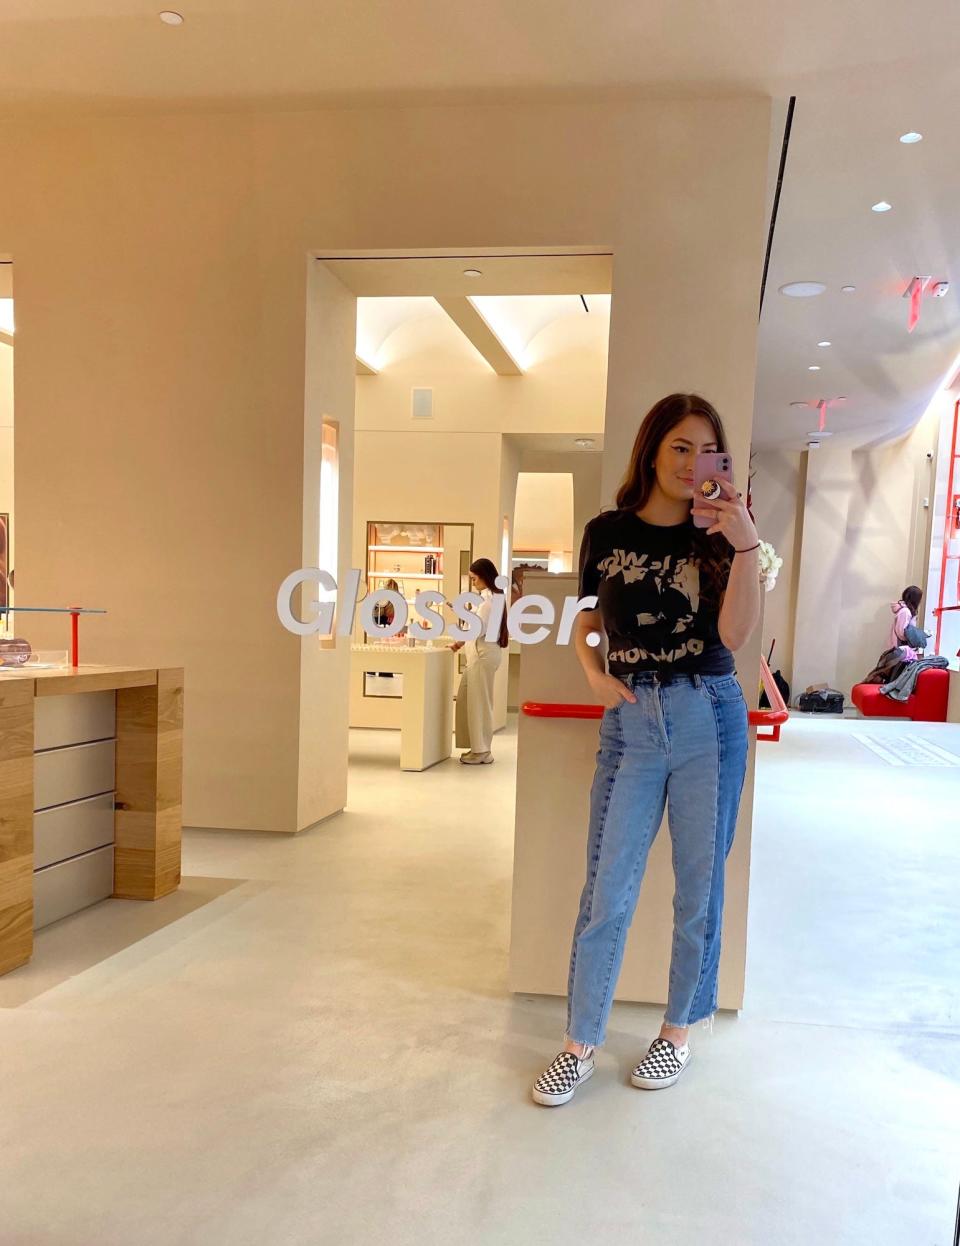 Reporter Amanda Krause at Glossier's flagship store in SoHo.